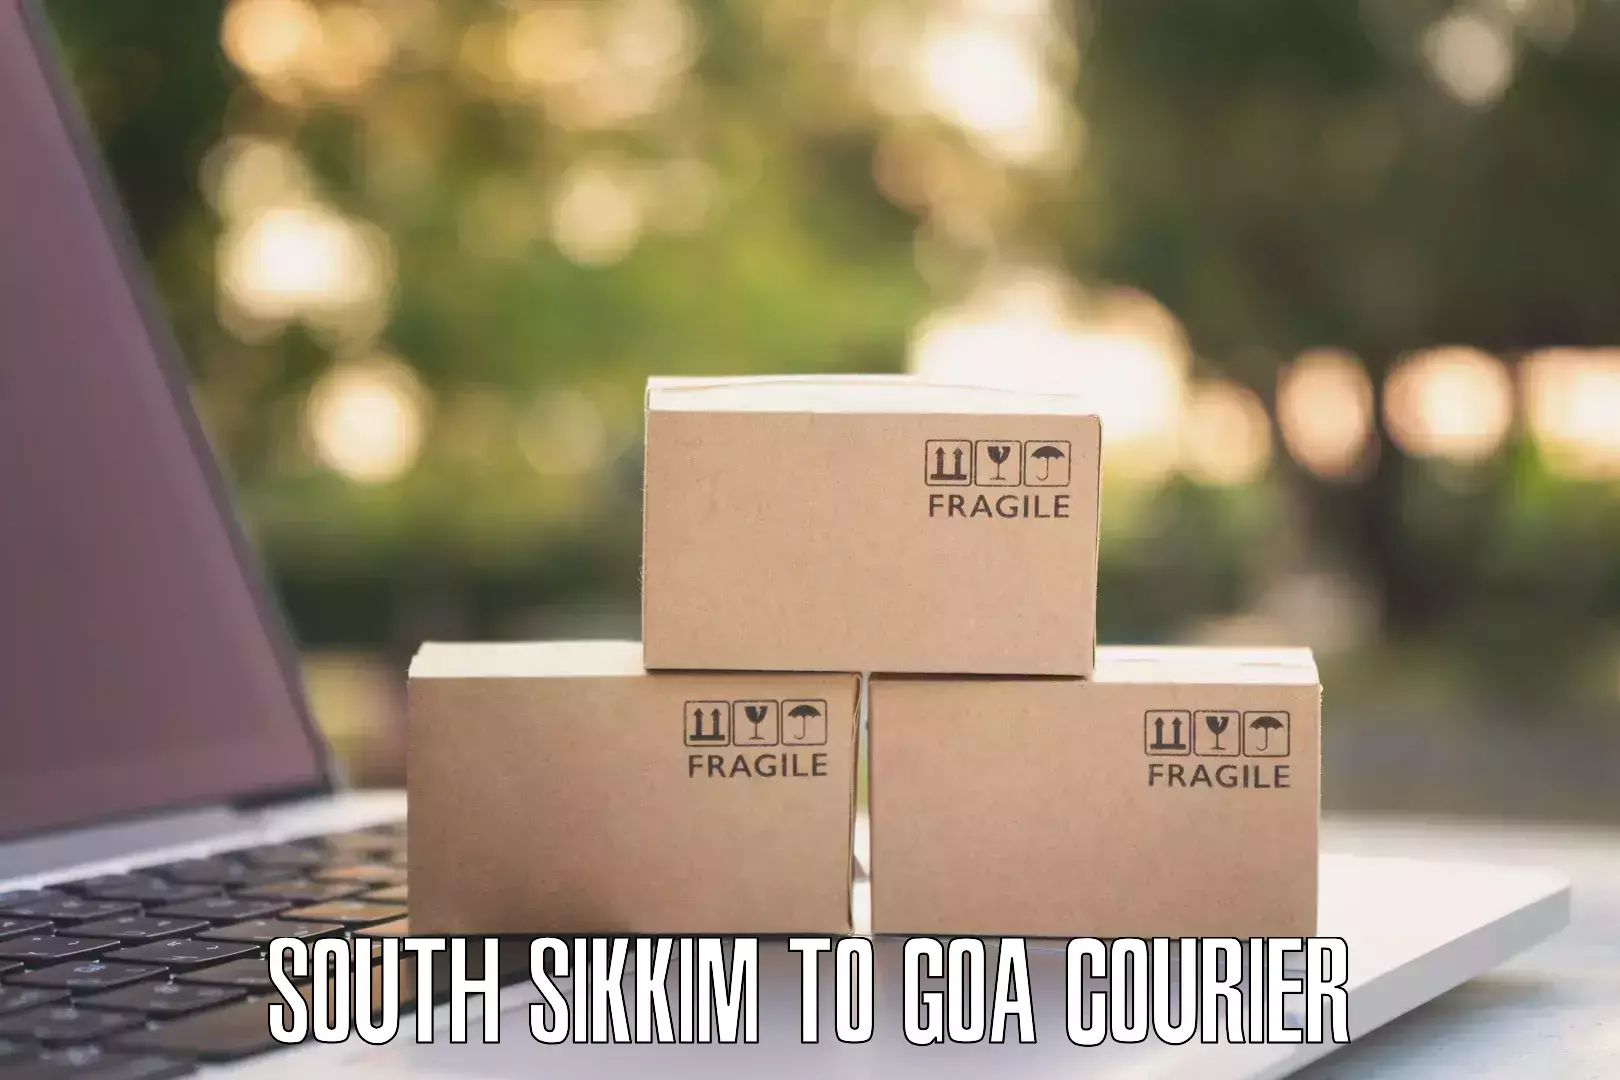 Online shipping calculator South Sikkim to Bardez